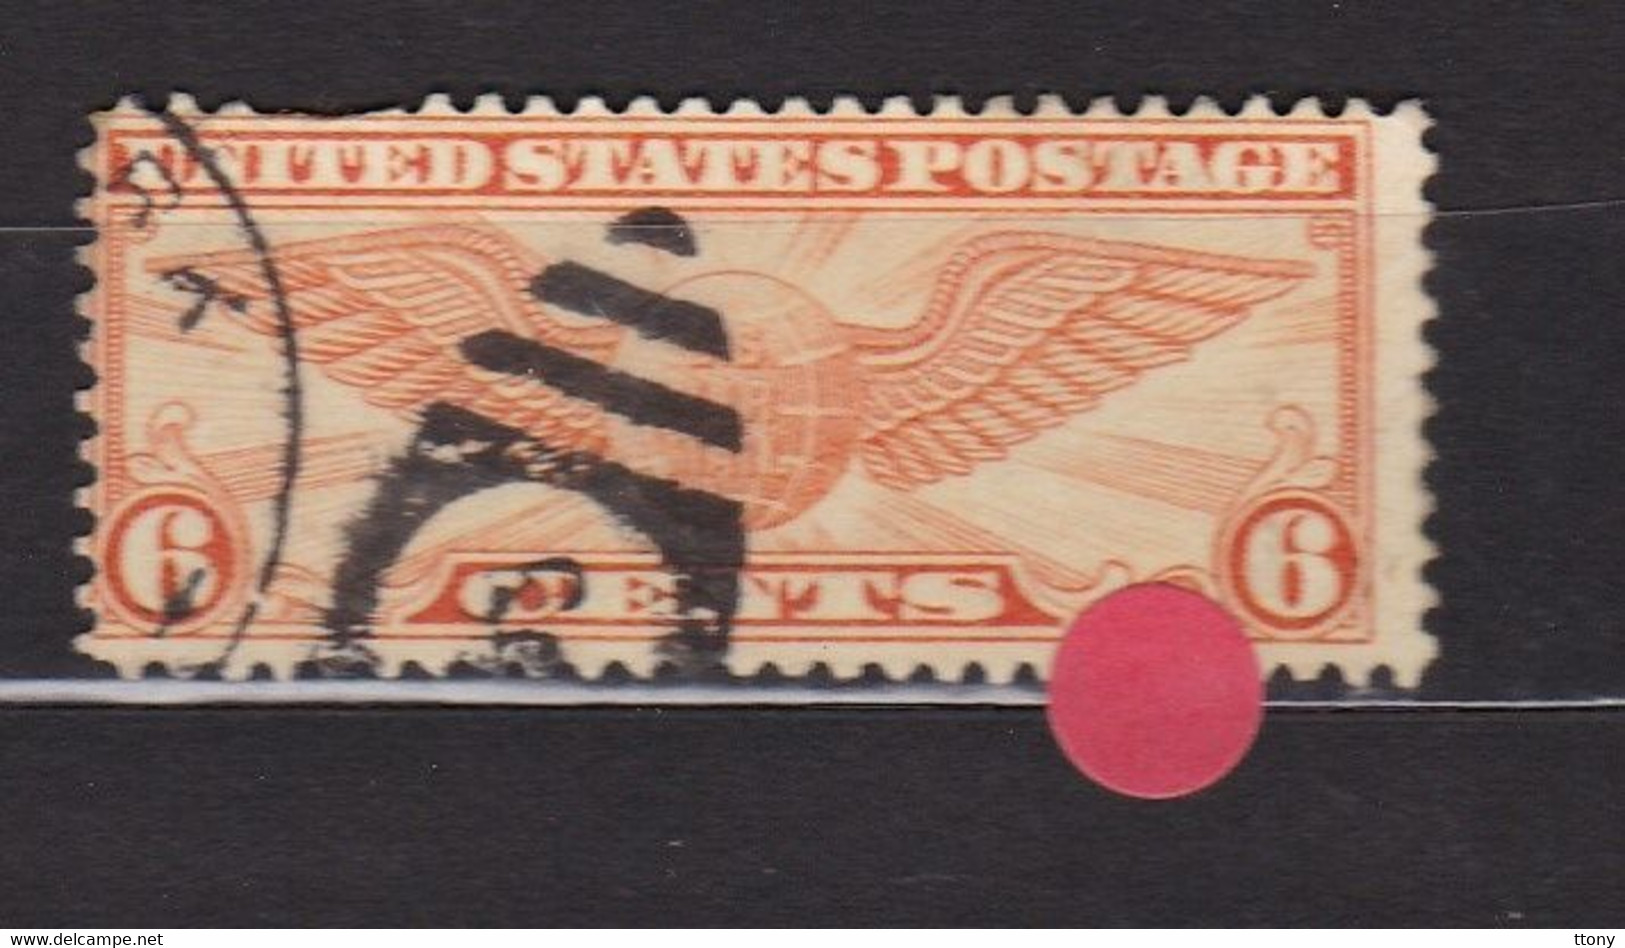 USA. Scott # C19     Used. Airmail Stamps. 1934    Winged Globe    Cachet - 1a. 1918-1940 Gebraucht